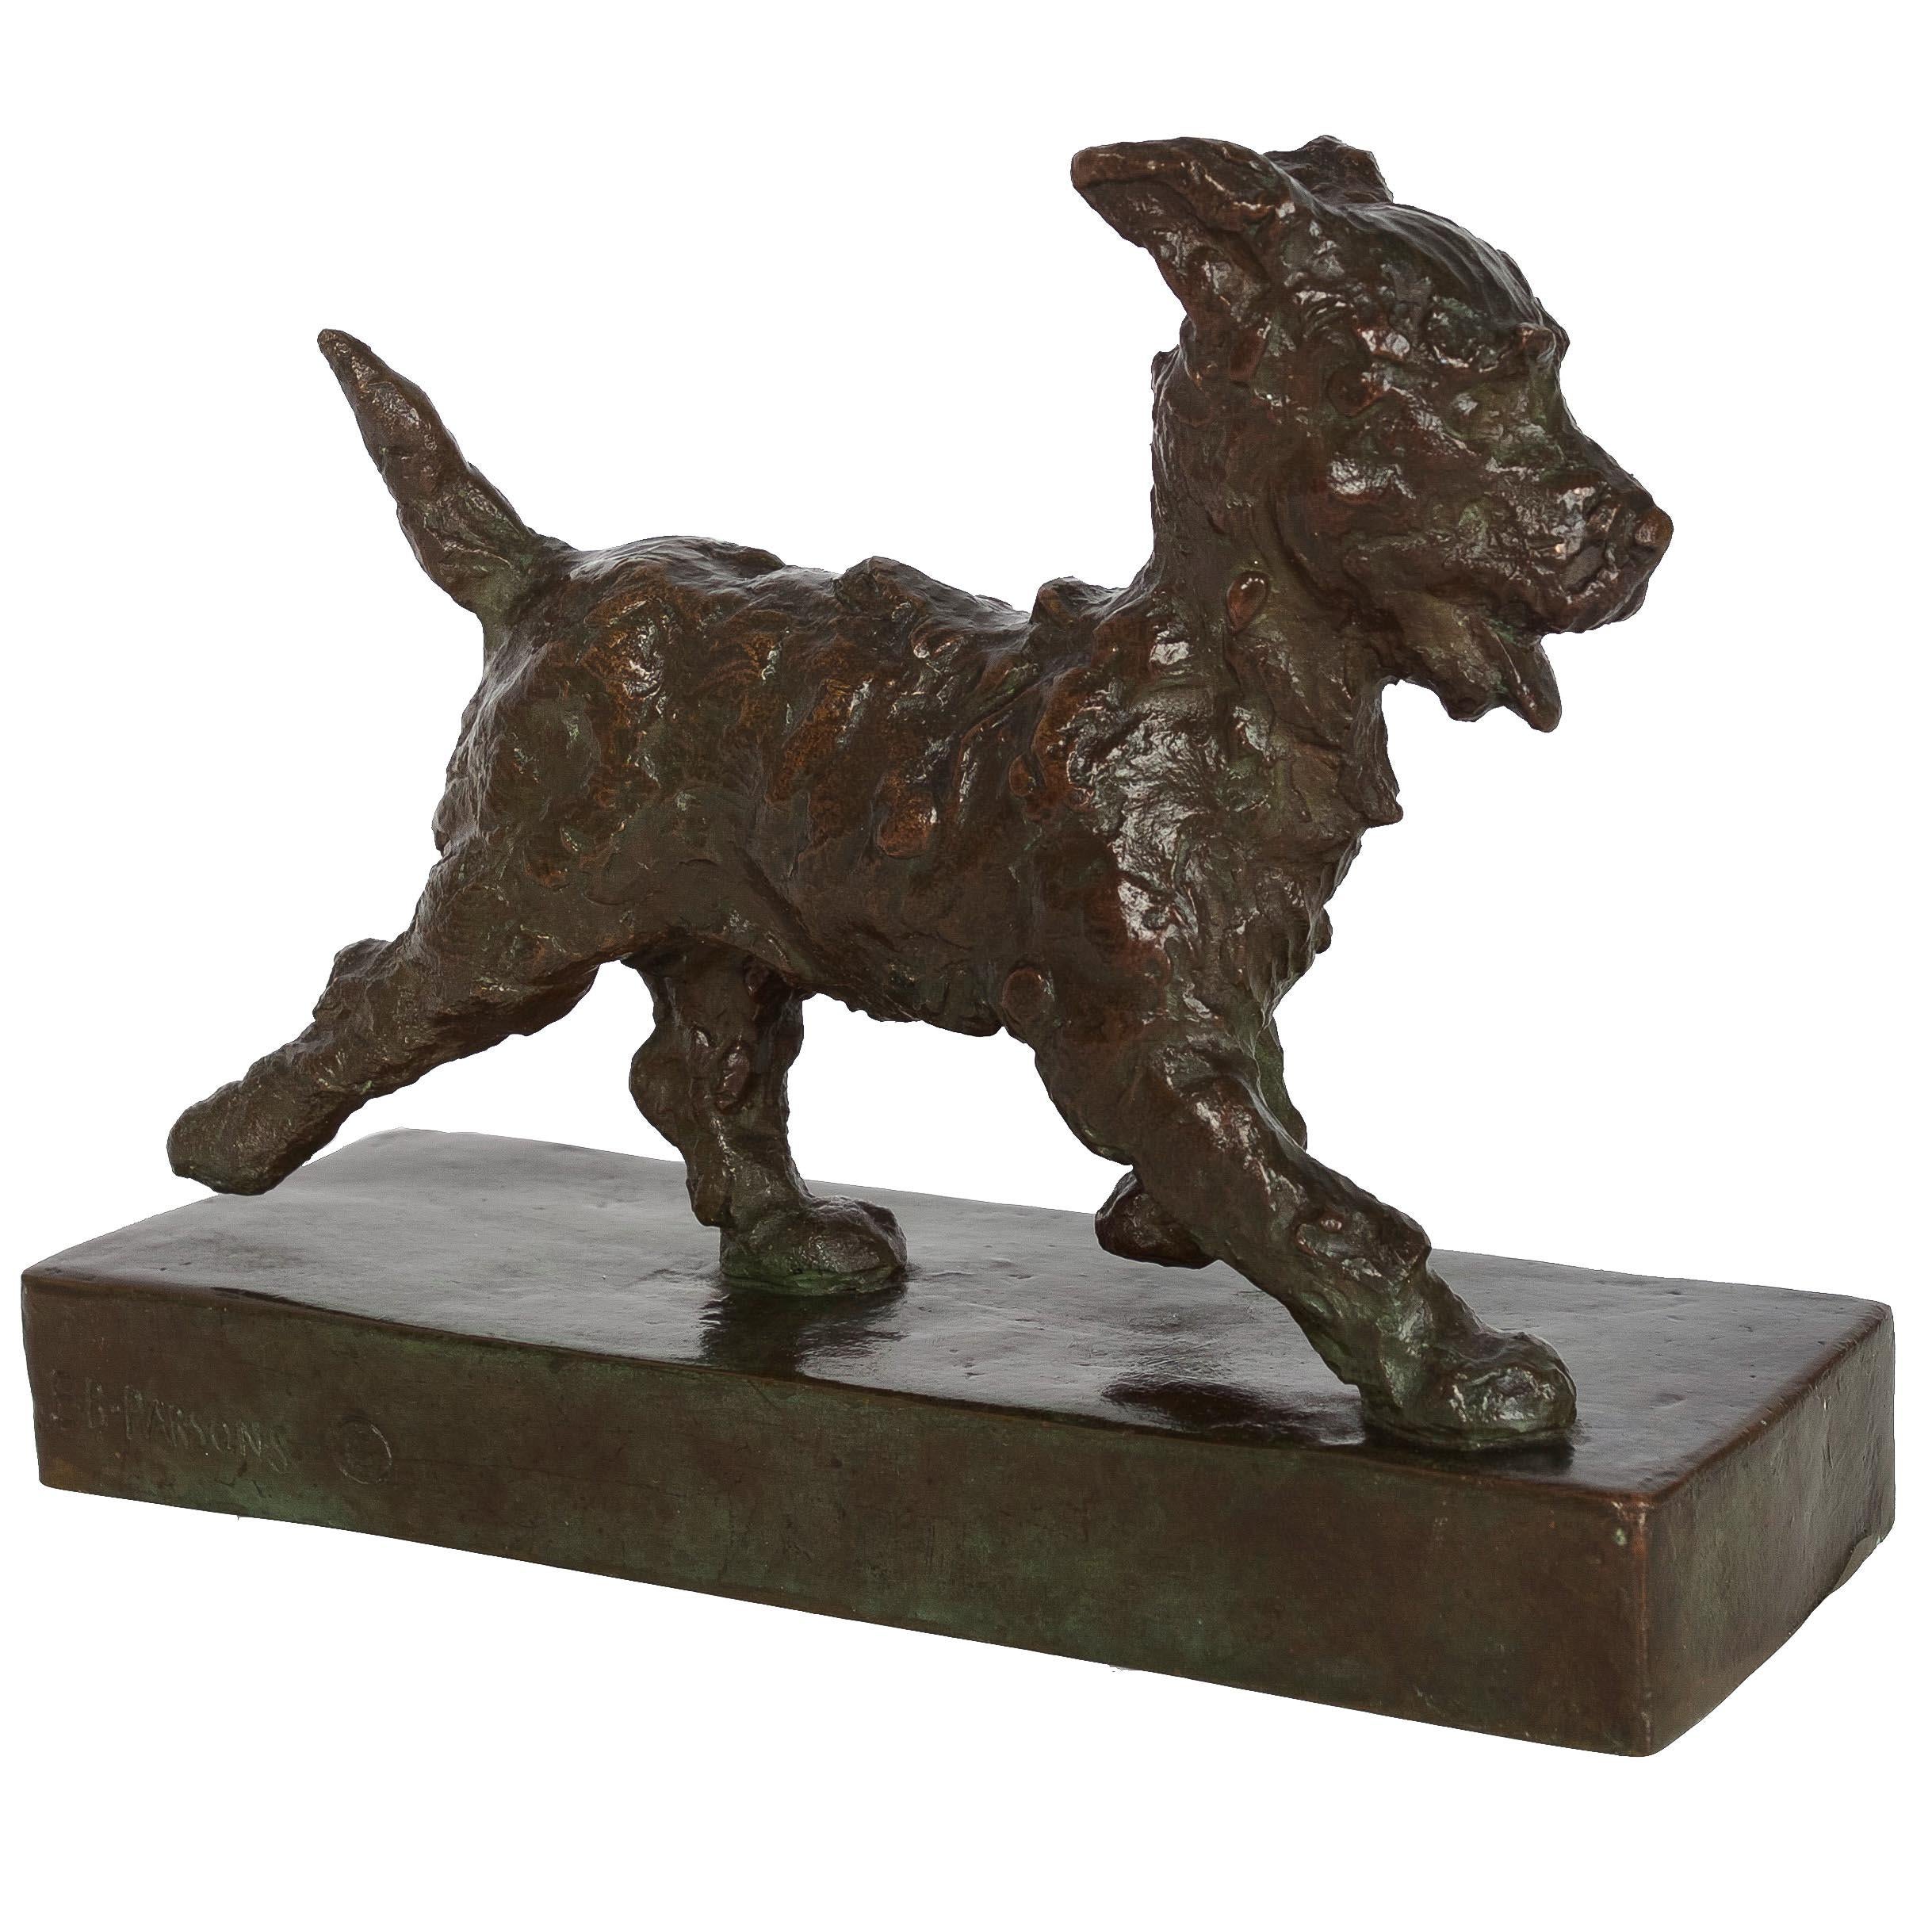 A very fine model of a Running Terrier from Edith Barretto Parsons' rather rare series of bookends capturing this playful creature in a variety of activities, it is a subject that was cast exclusively by the Gorham Co. foundry. It retains a